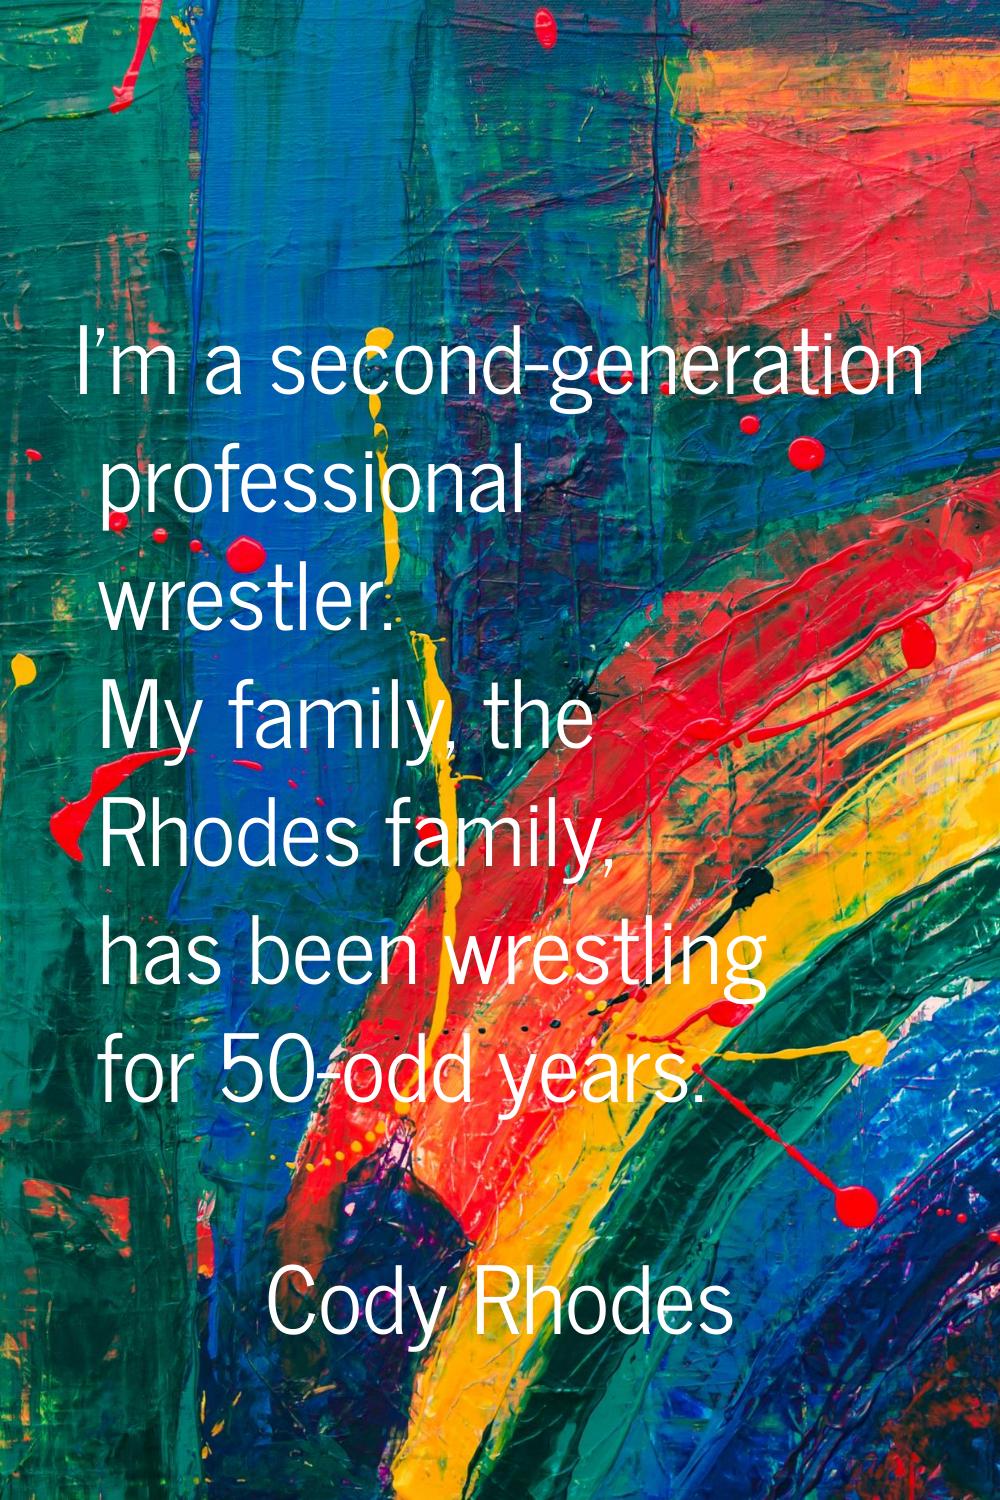 I'm a second-generation professional wrestler. My family, the Rhodes family, has been wrestling for